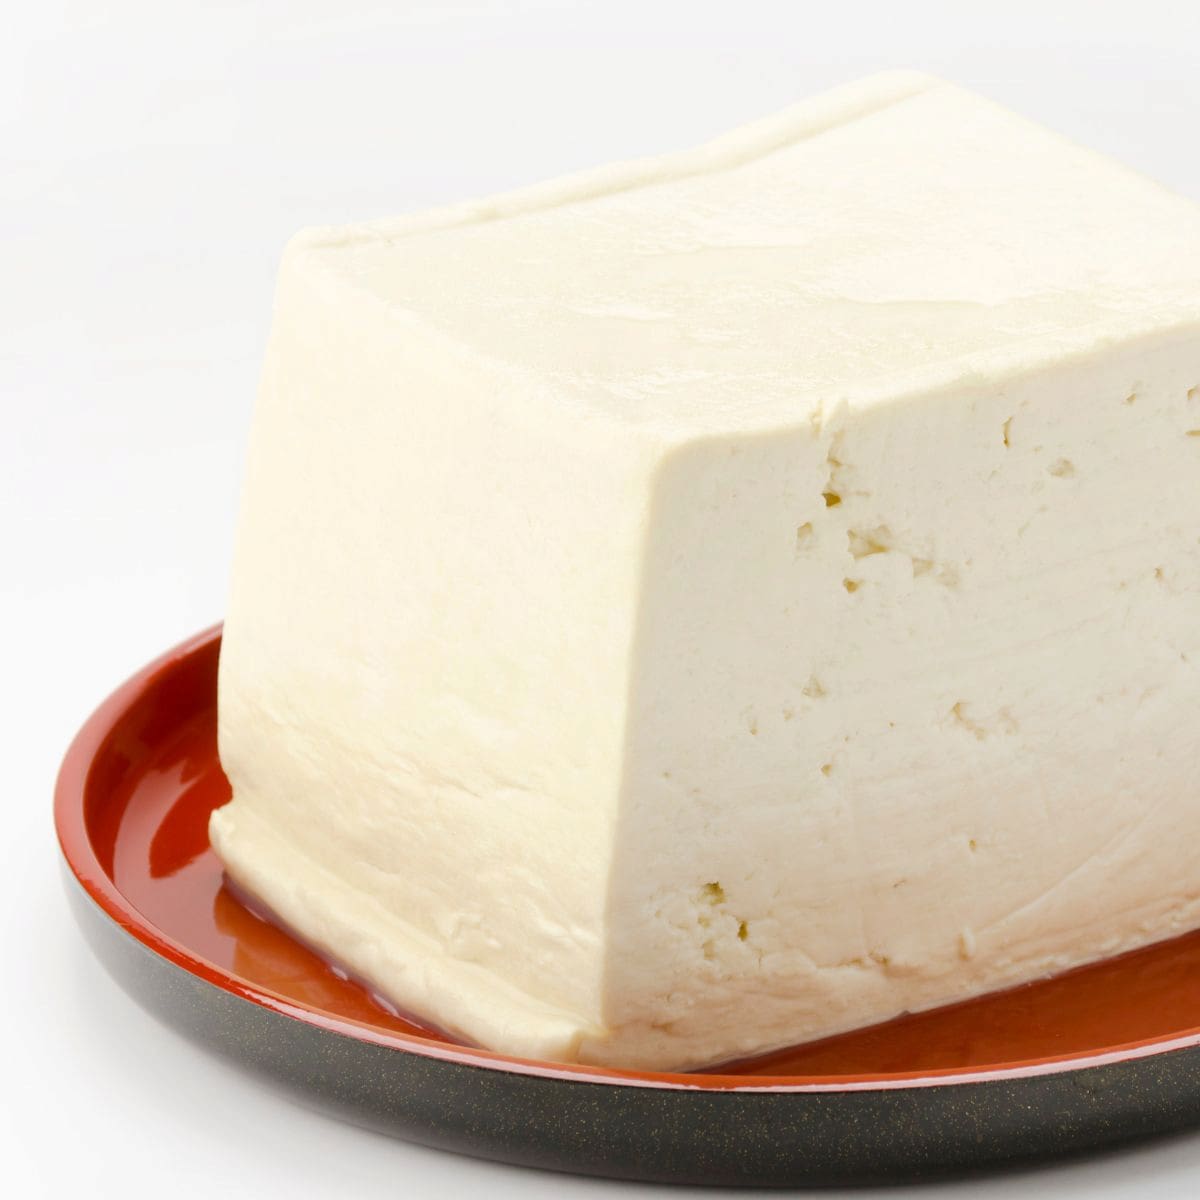 A block of regular tofu, one of the common types of tofu, on a plate.